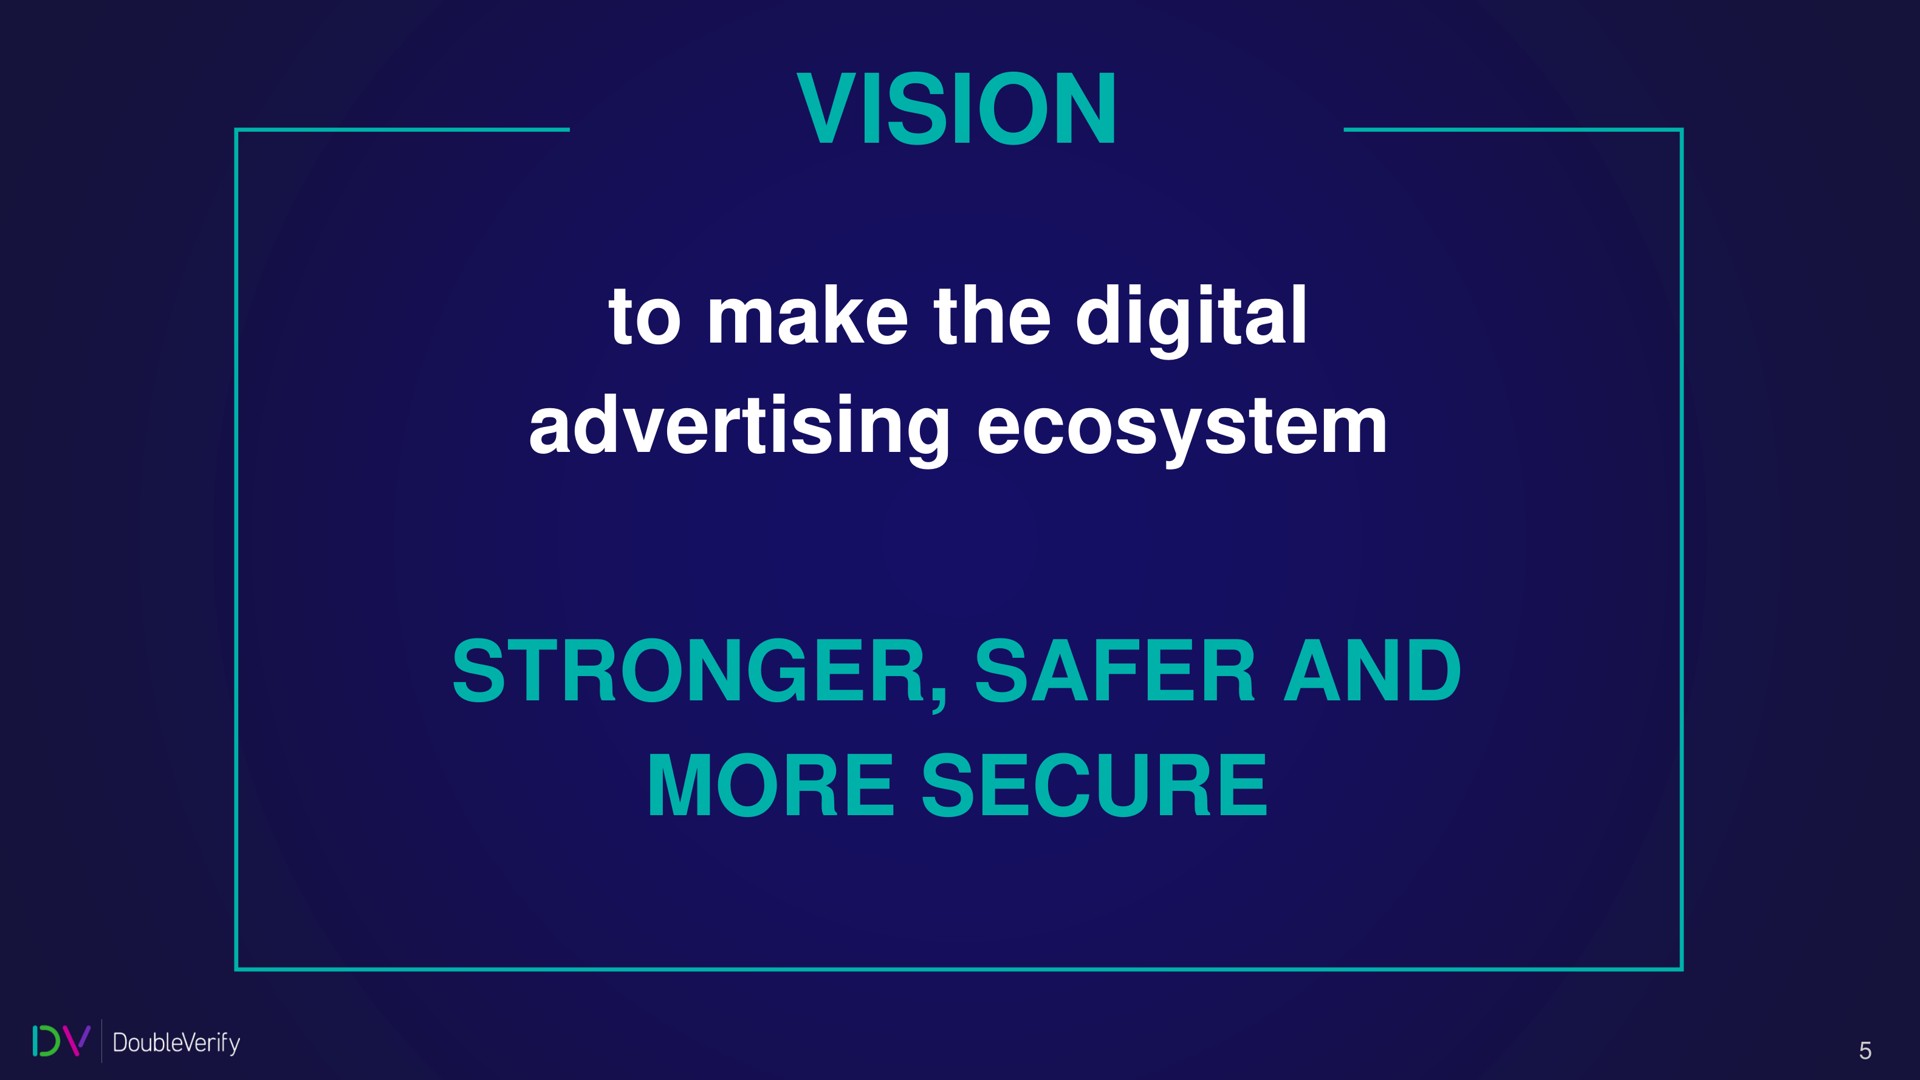 vision to make the digital advertising ecosystem and more secure | DoubleVerify